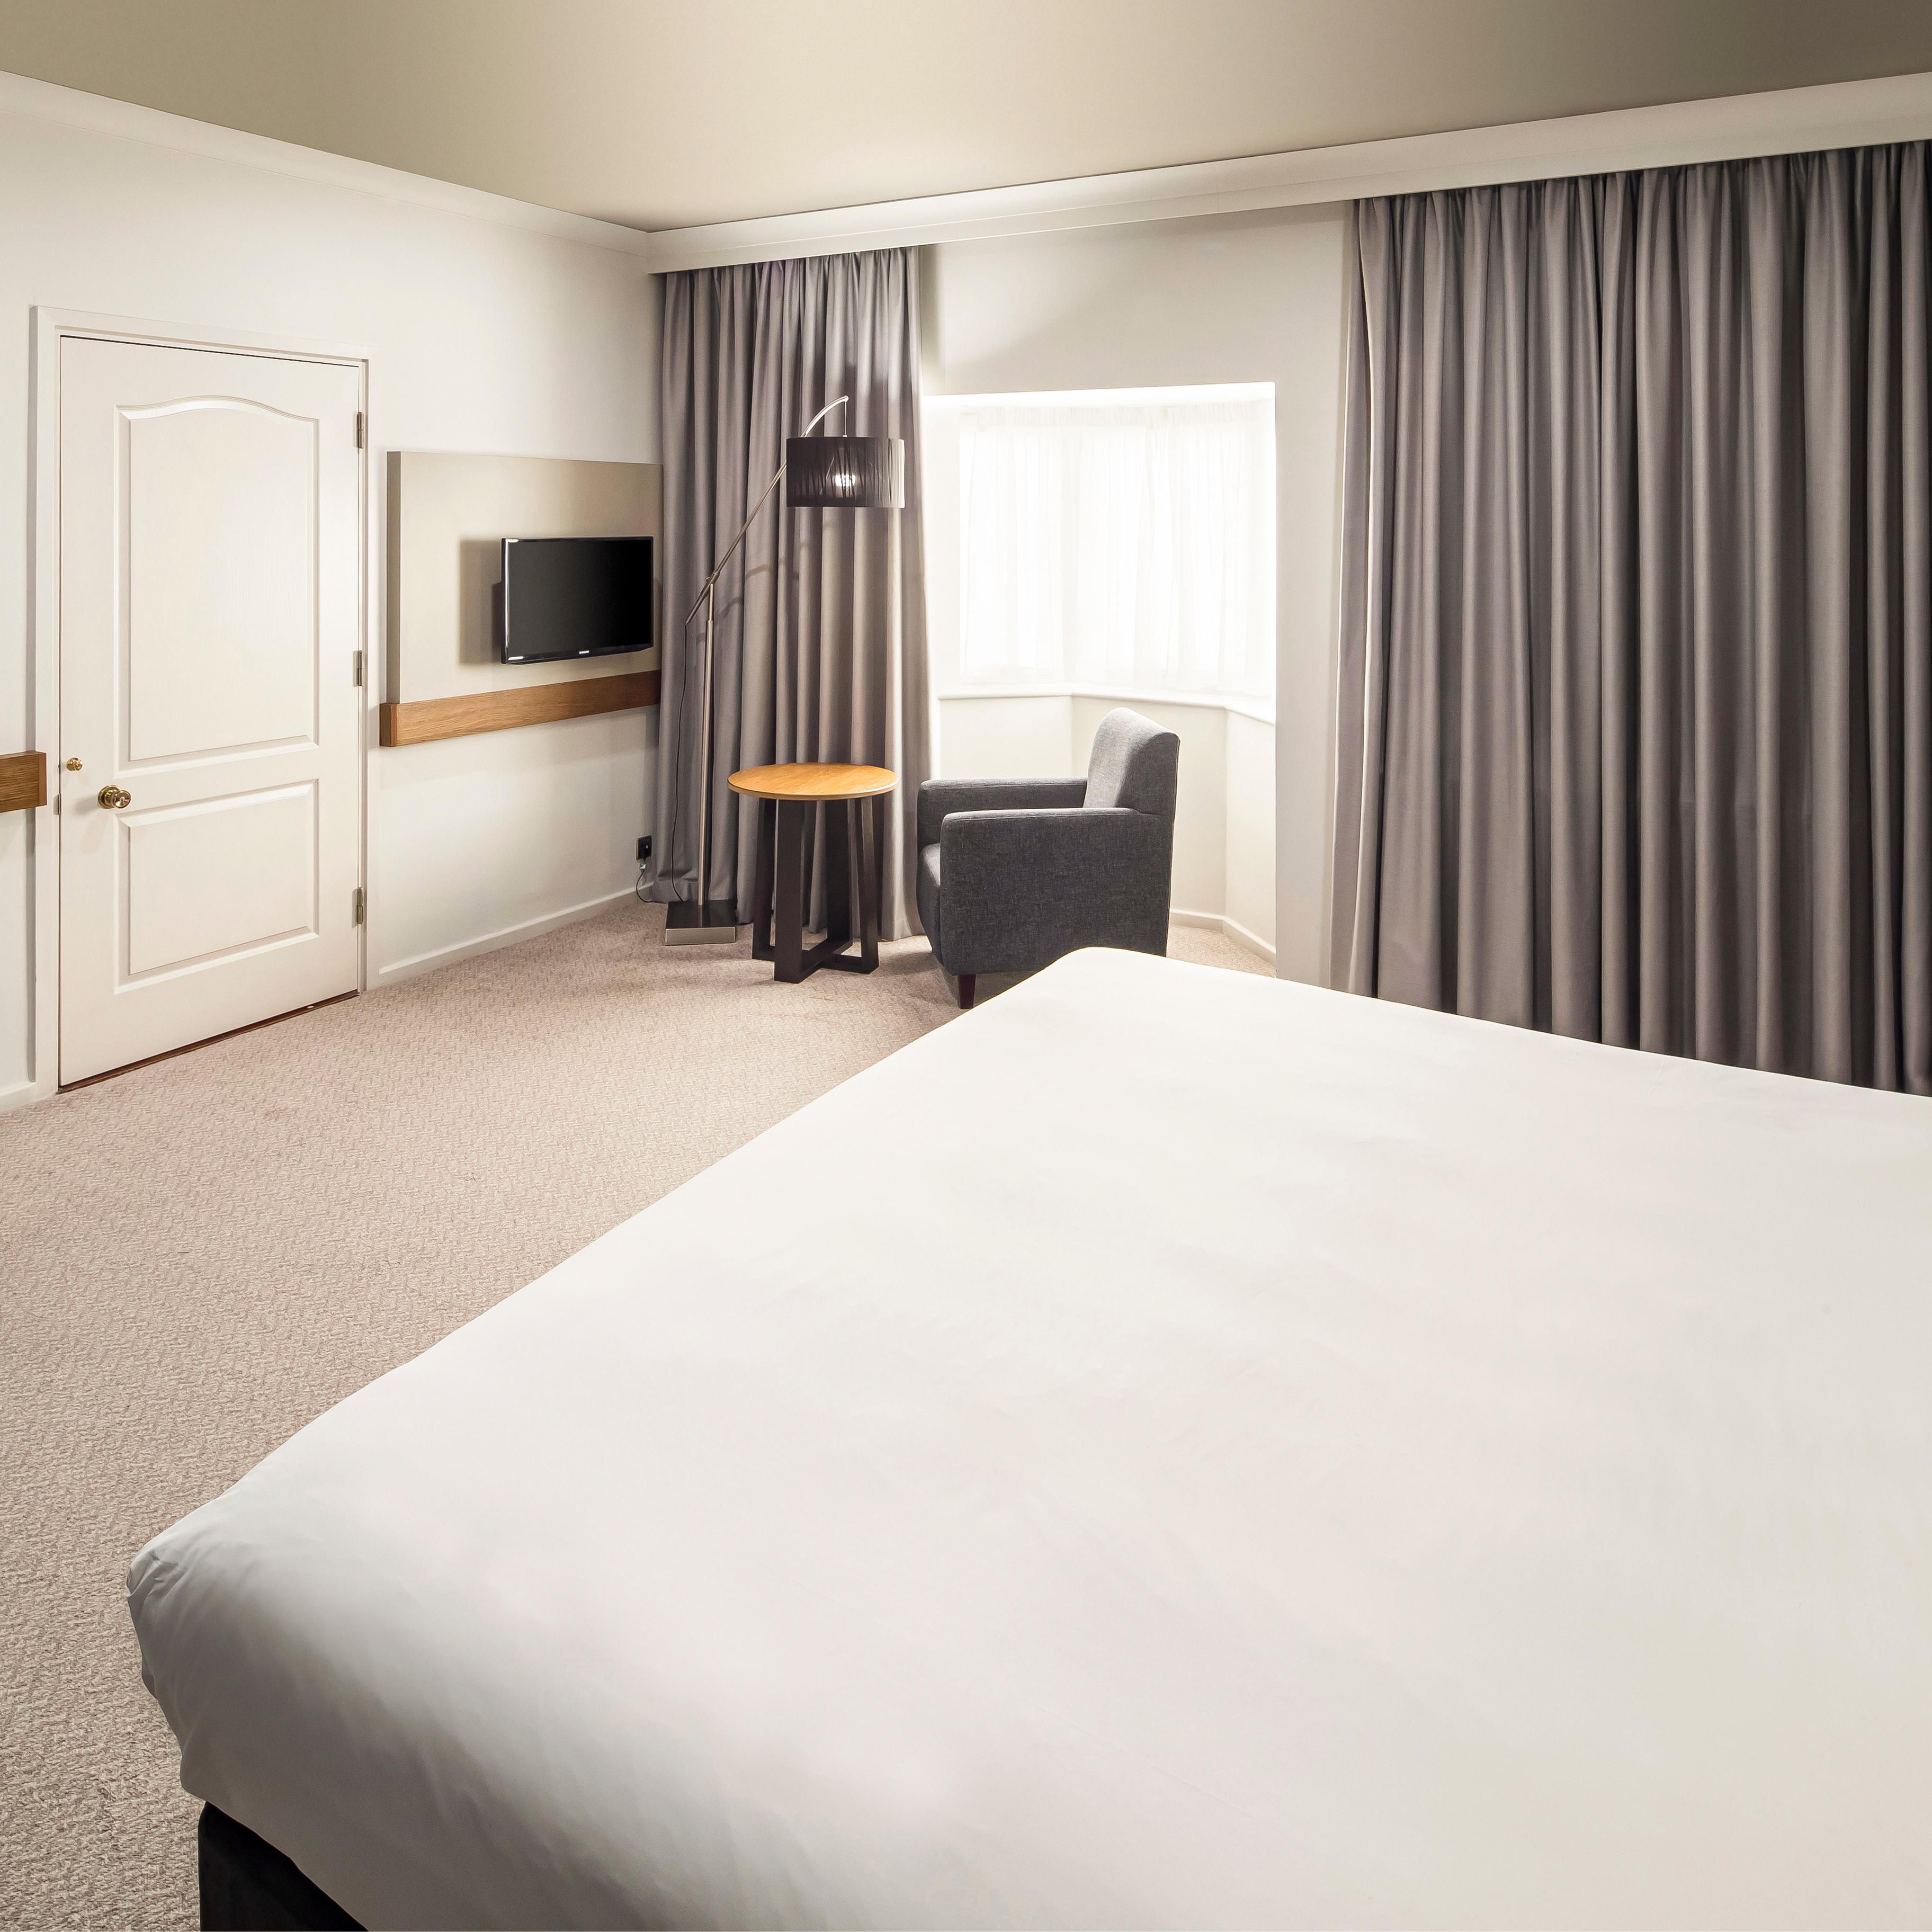 Enjoy your stay in our modern King Executive bedrooms.